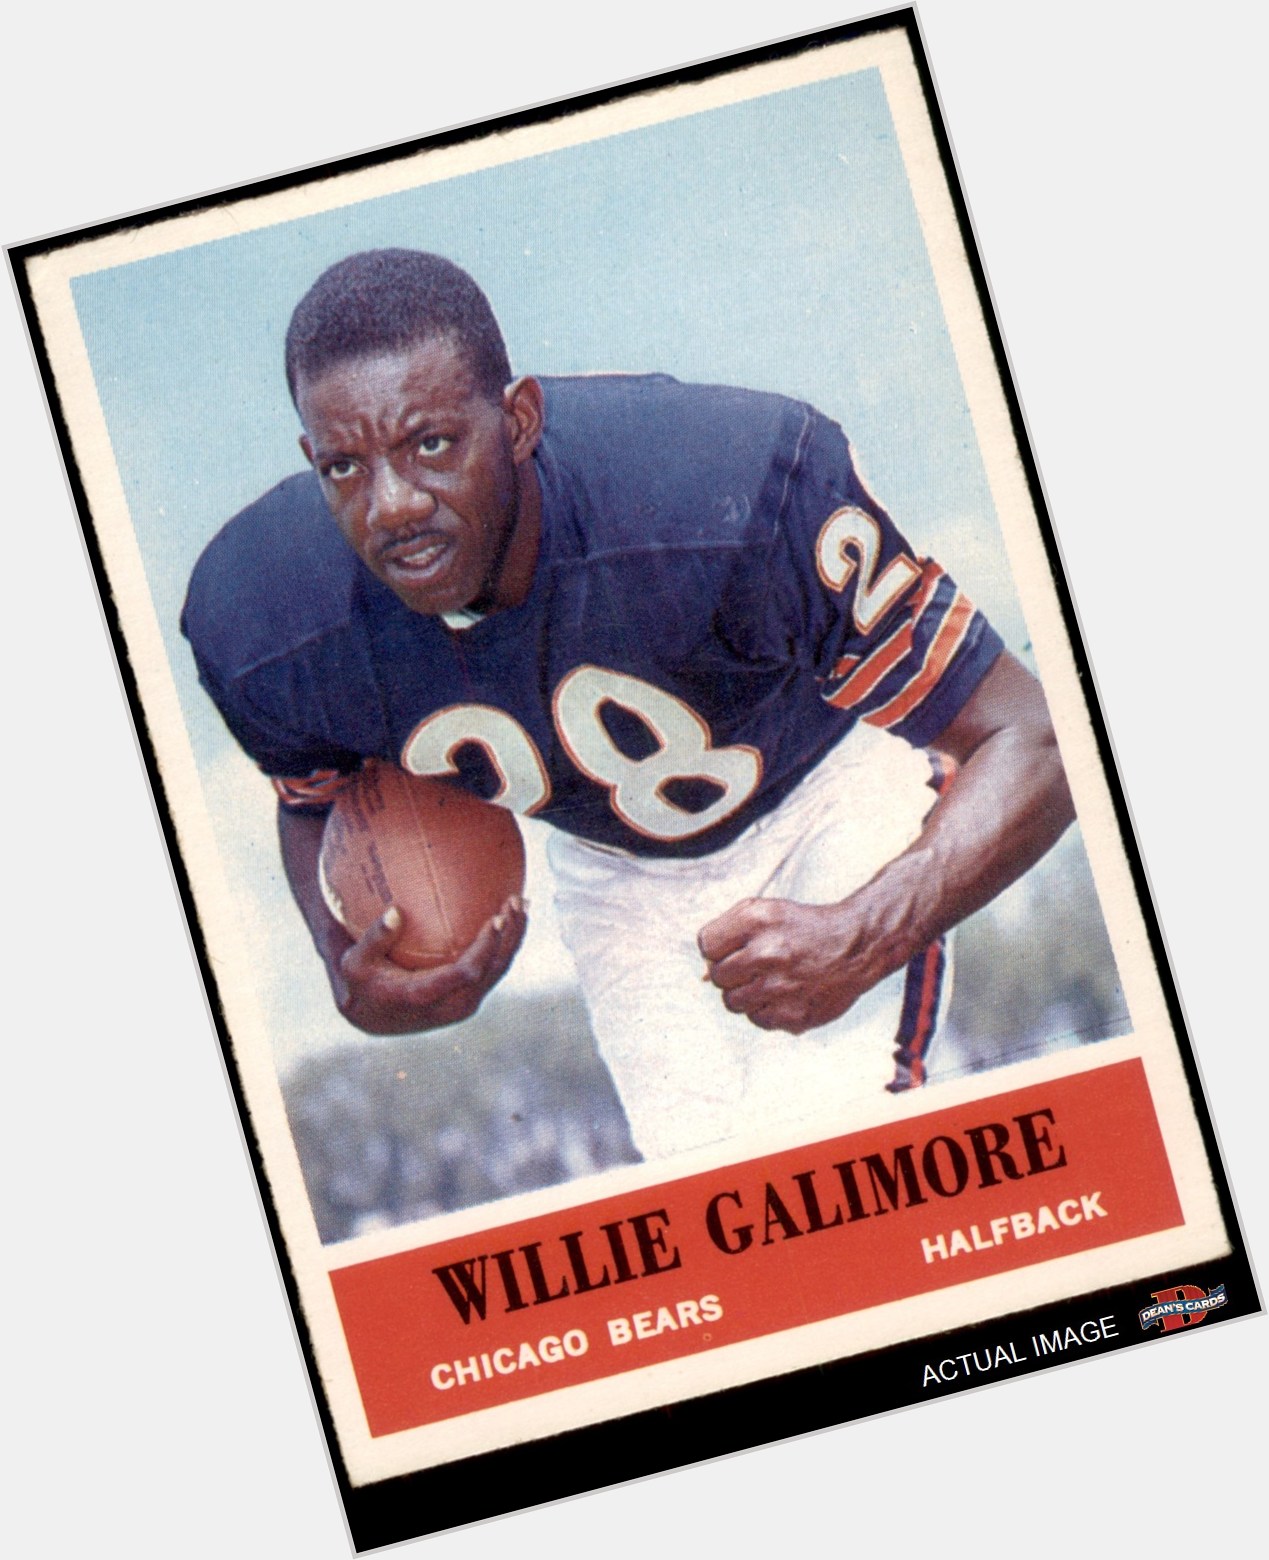 where is Willie Galimore 3